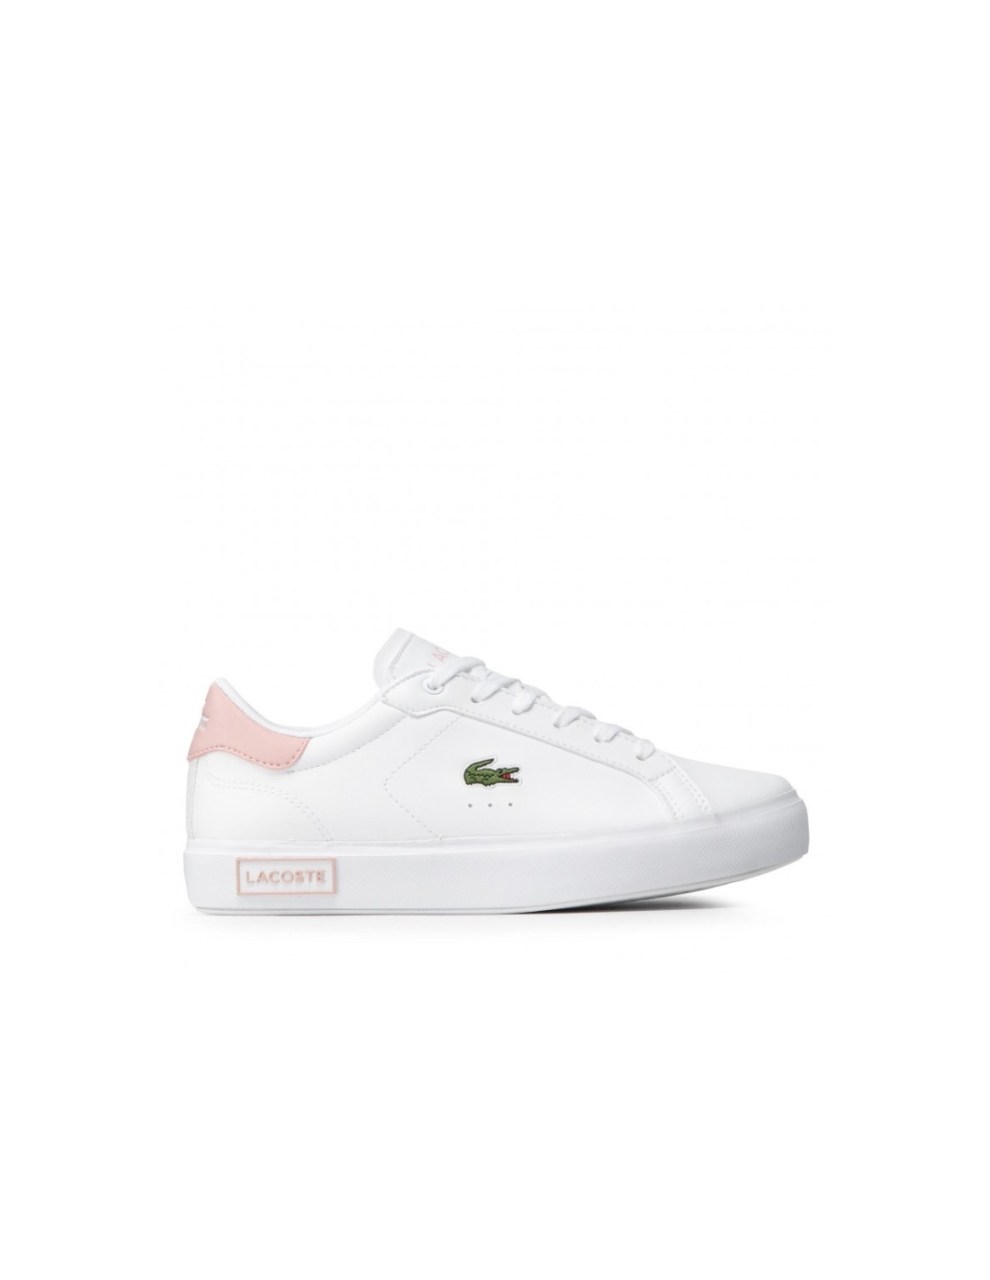 DEPORTIVO JUNIORS LACOSTE POWERCOURT SYNTHETIC SNEAKERS WHITE / LIGHT PINK